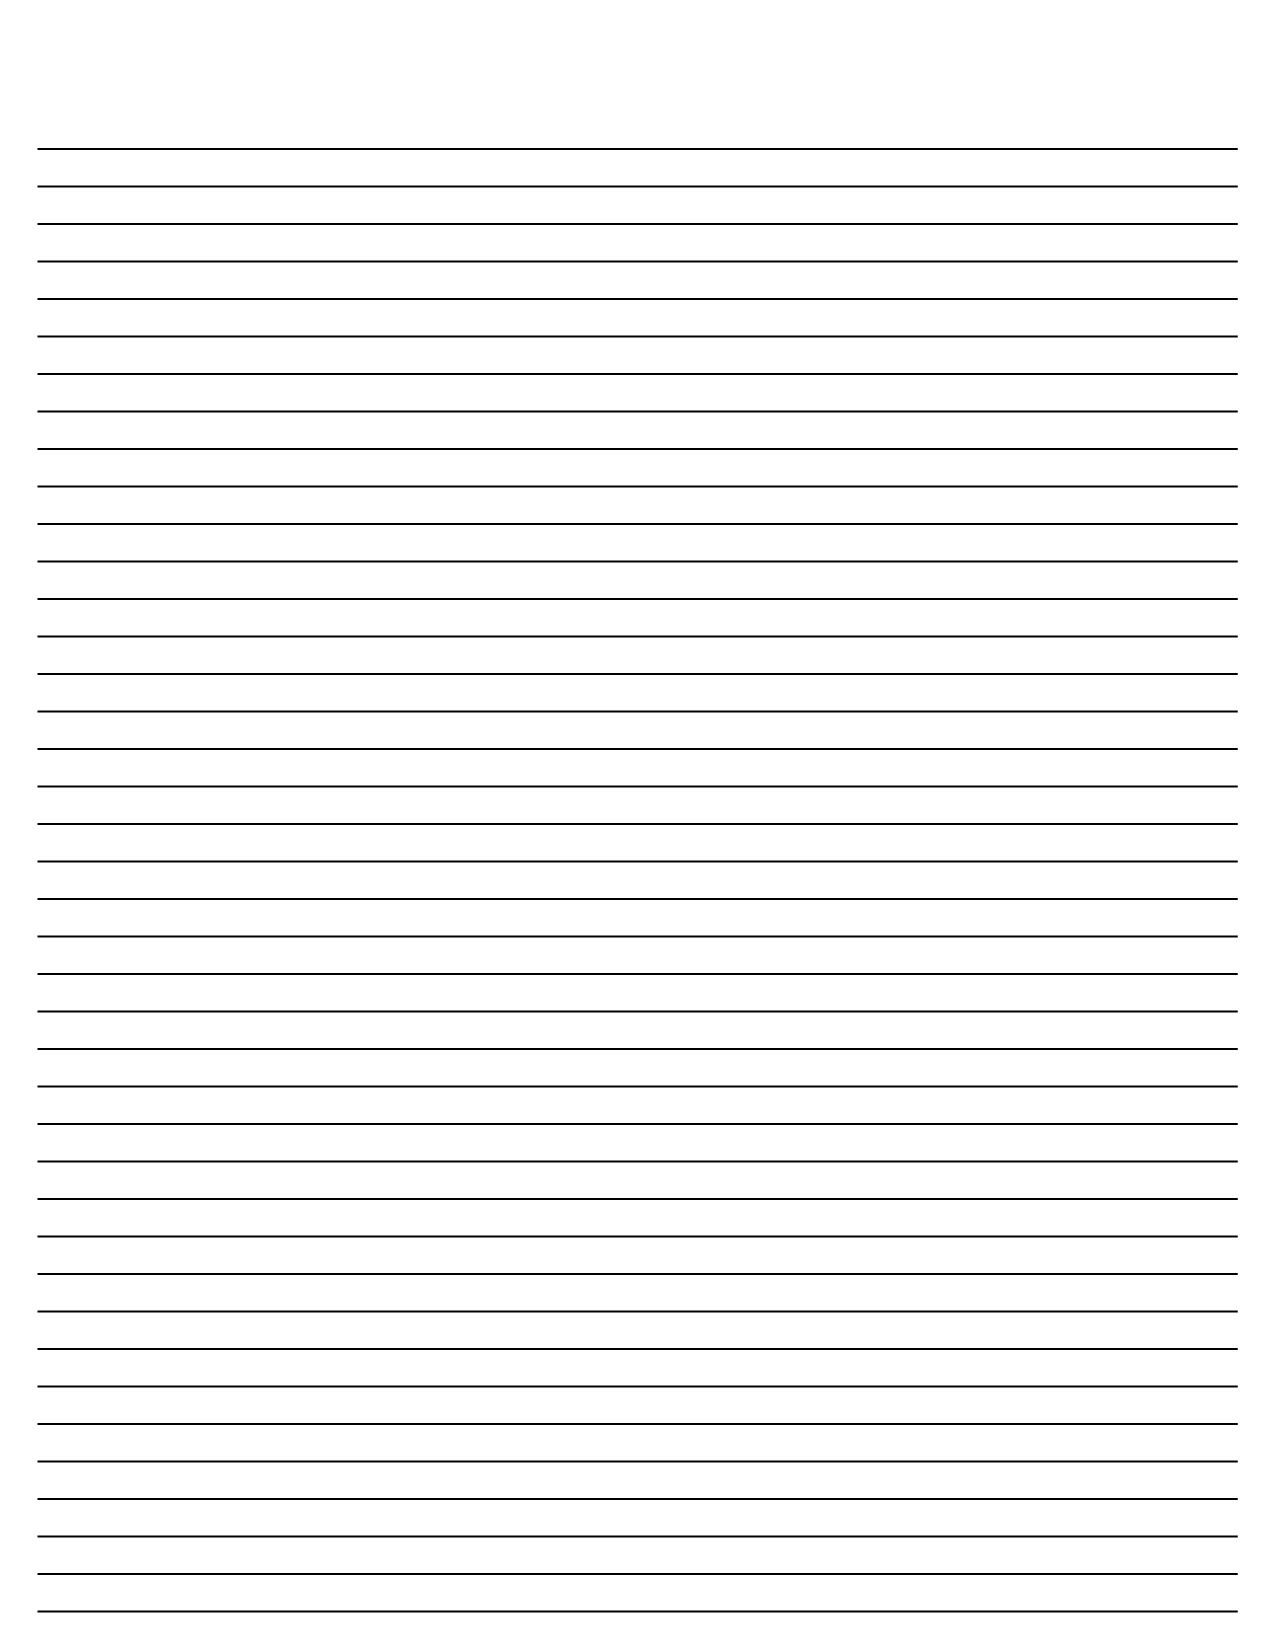 printable-lined-paper-printable-lined-paper-lined-writing-paper-lined